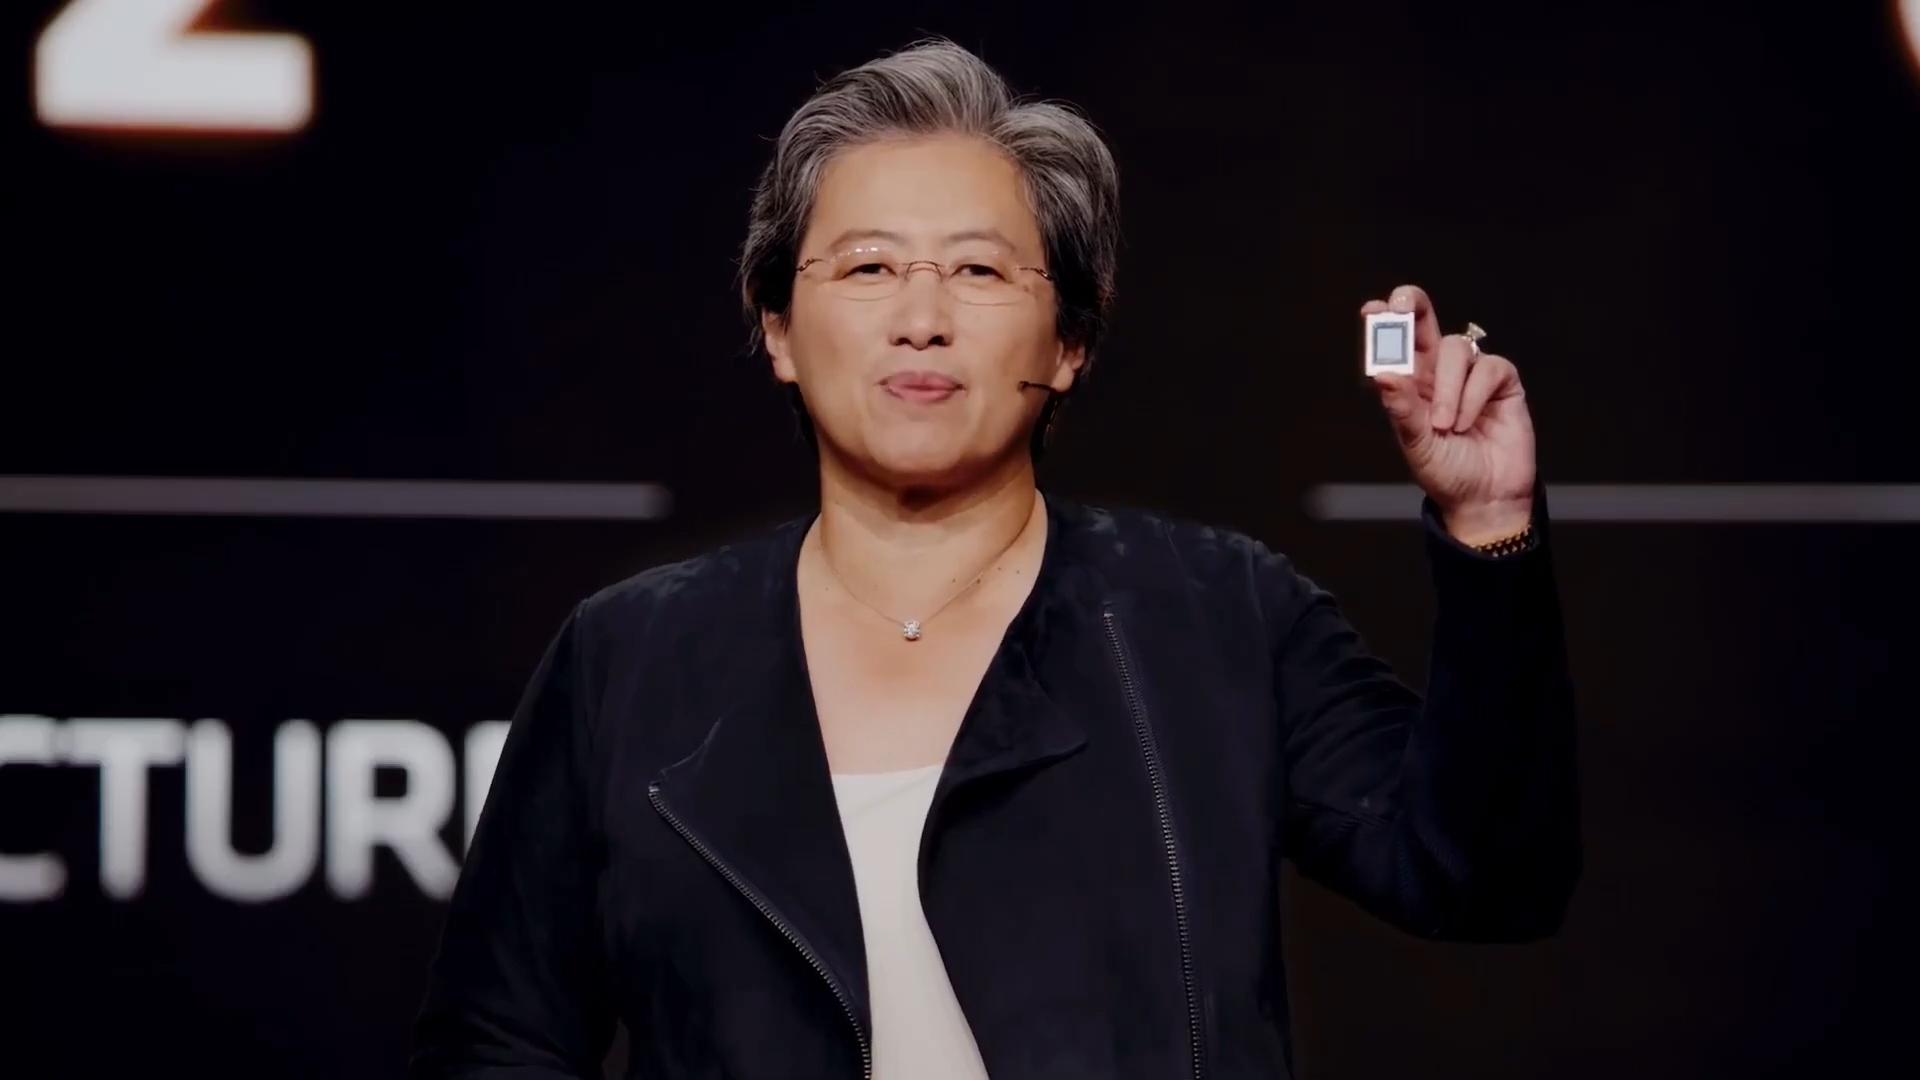 Amd Launches Ryzen 6000 Laptop Processors At Ces 2022 To Give Intel Nightmares